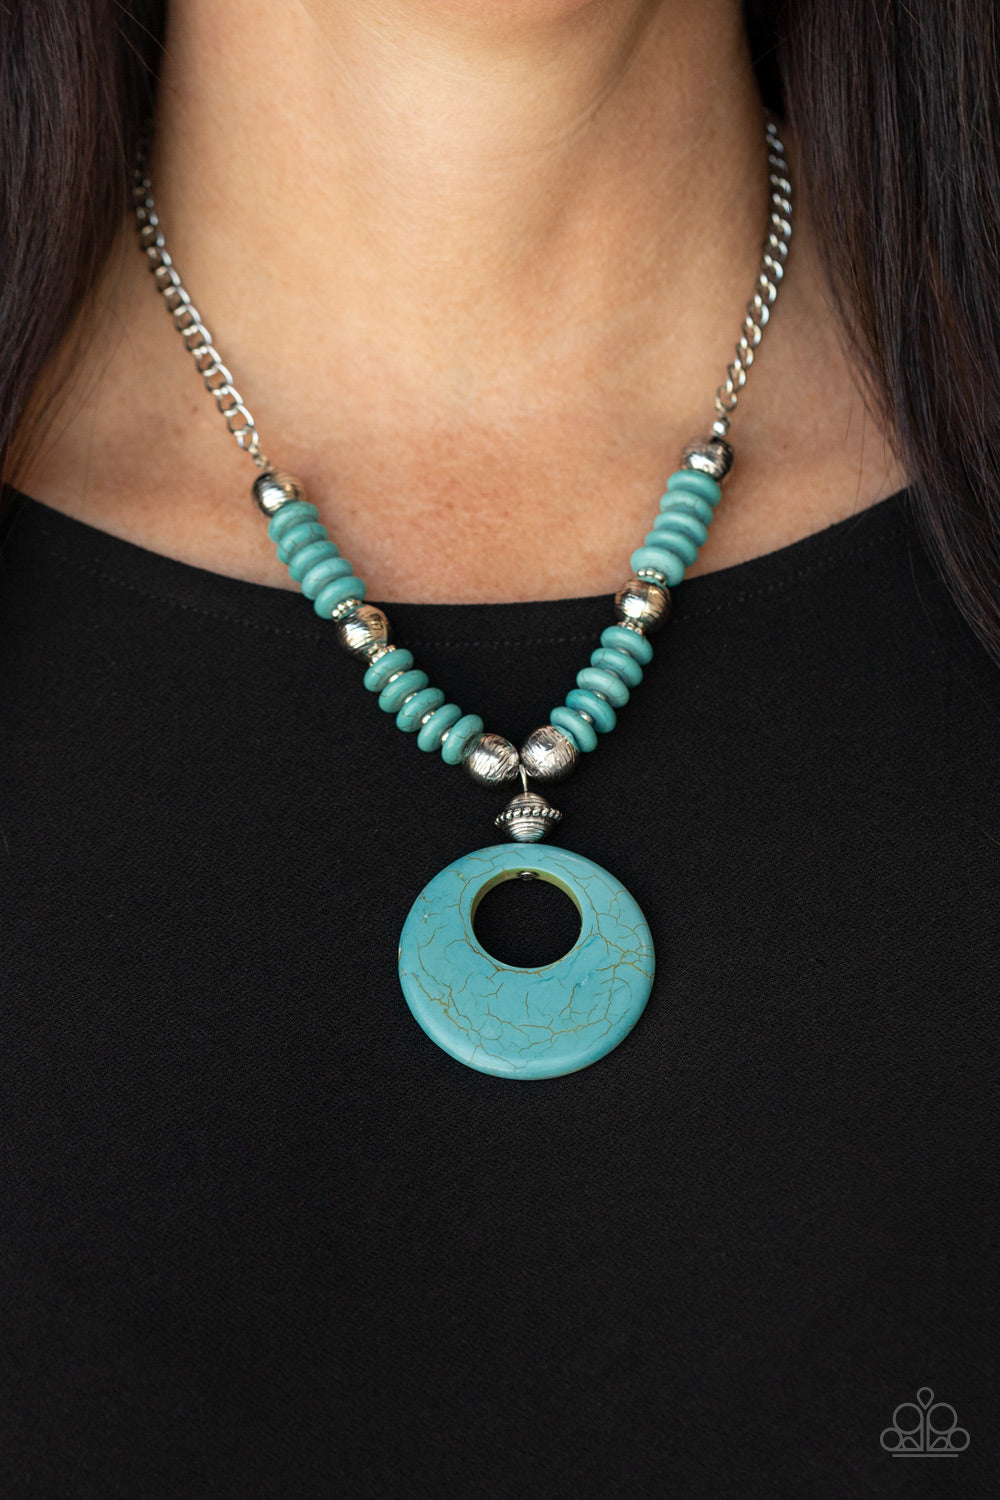 Oasis Goddess - Blue/Turquoise necklace (2021 FALL "PREVIEW")